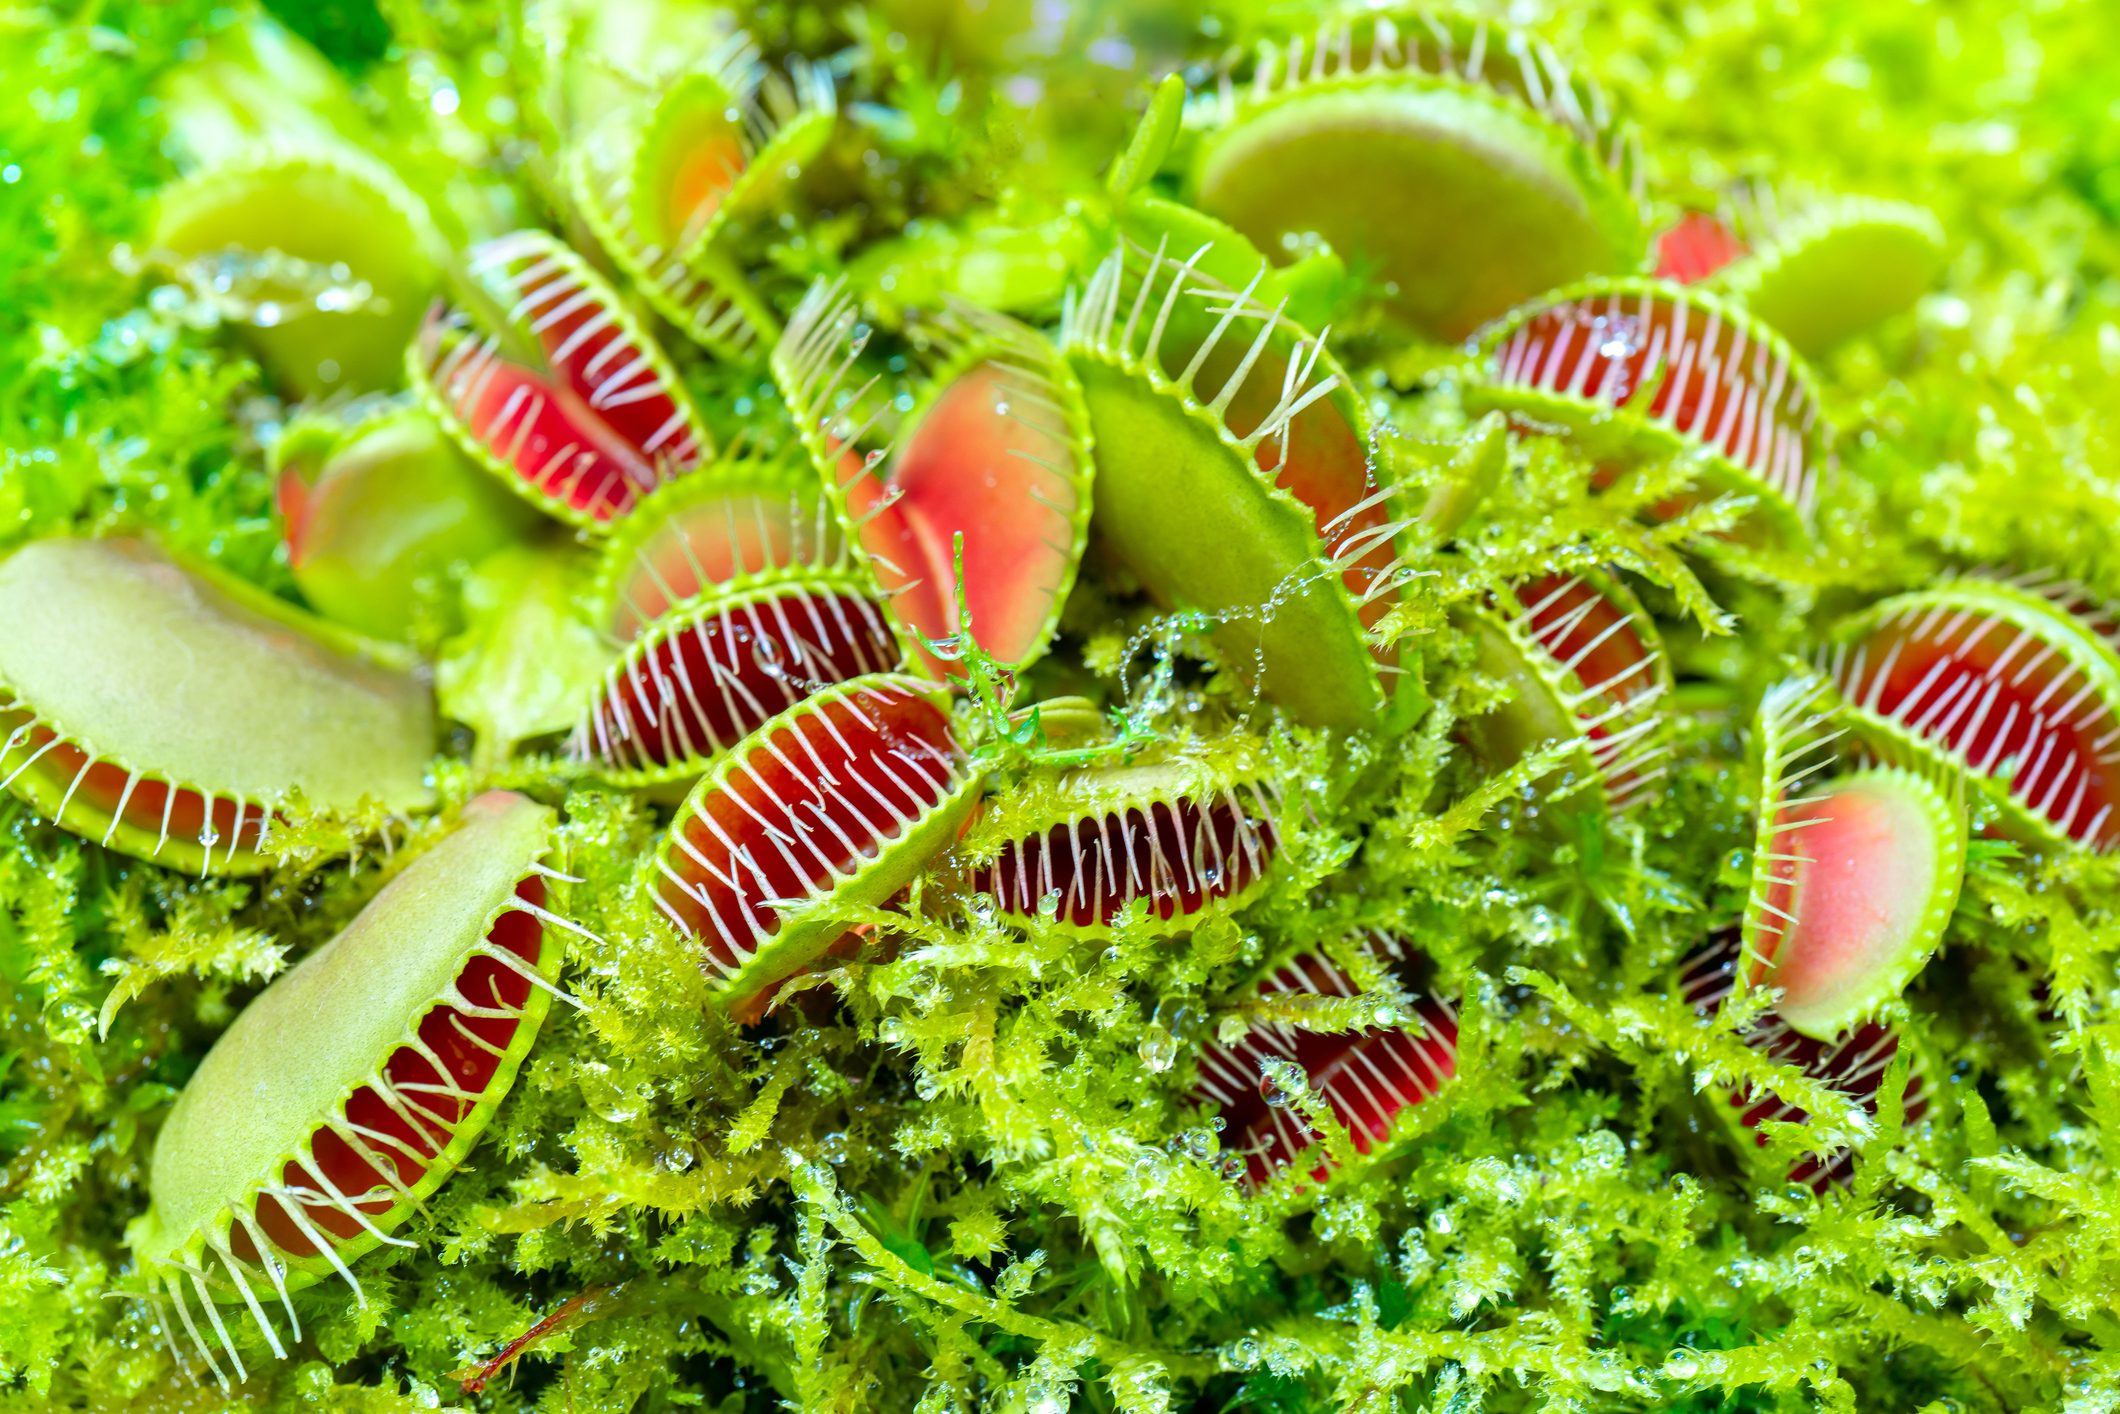 Venus Flytrap: How to Care for This Carnivorous Houseplant